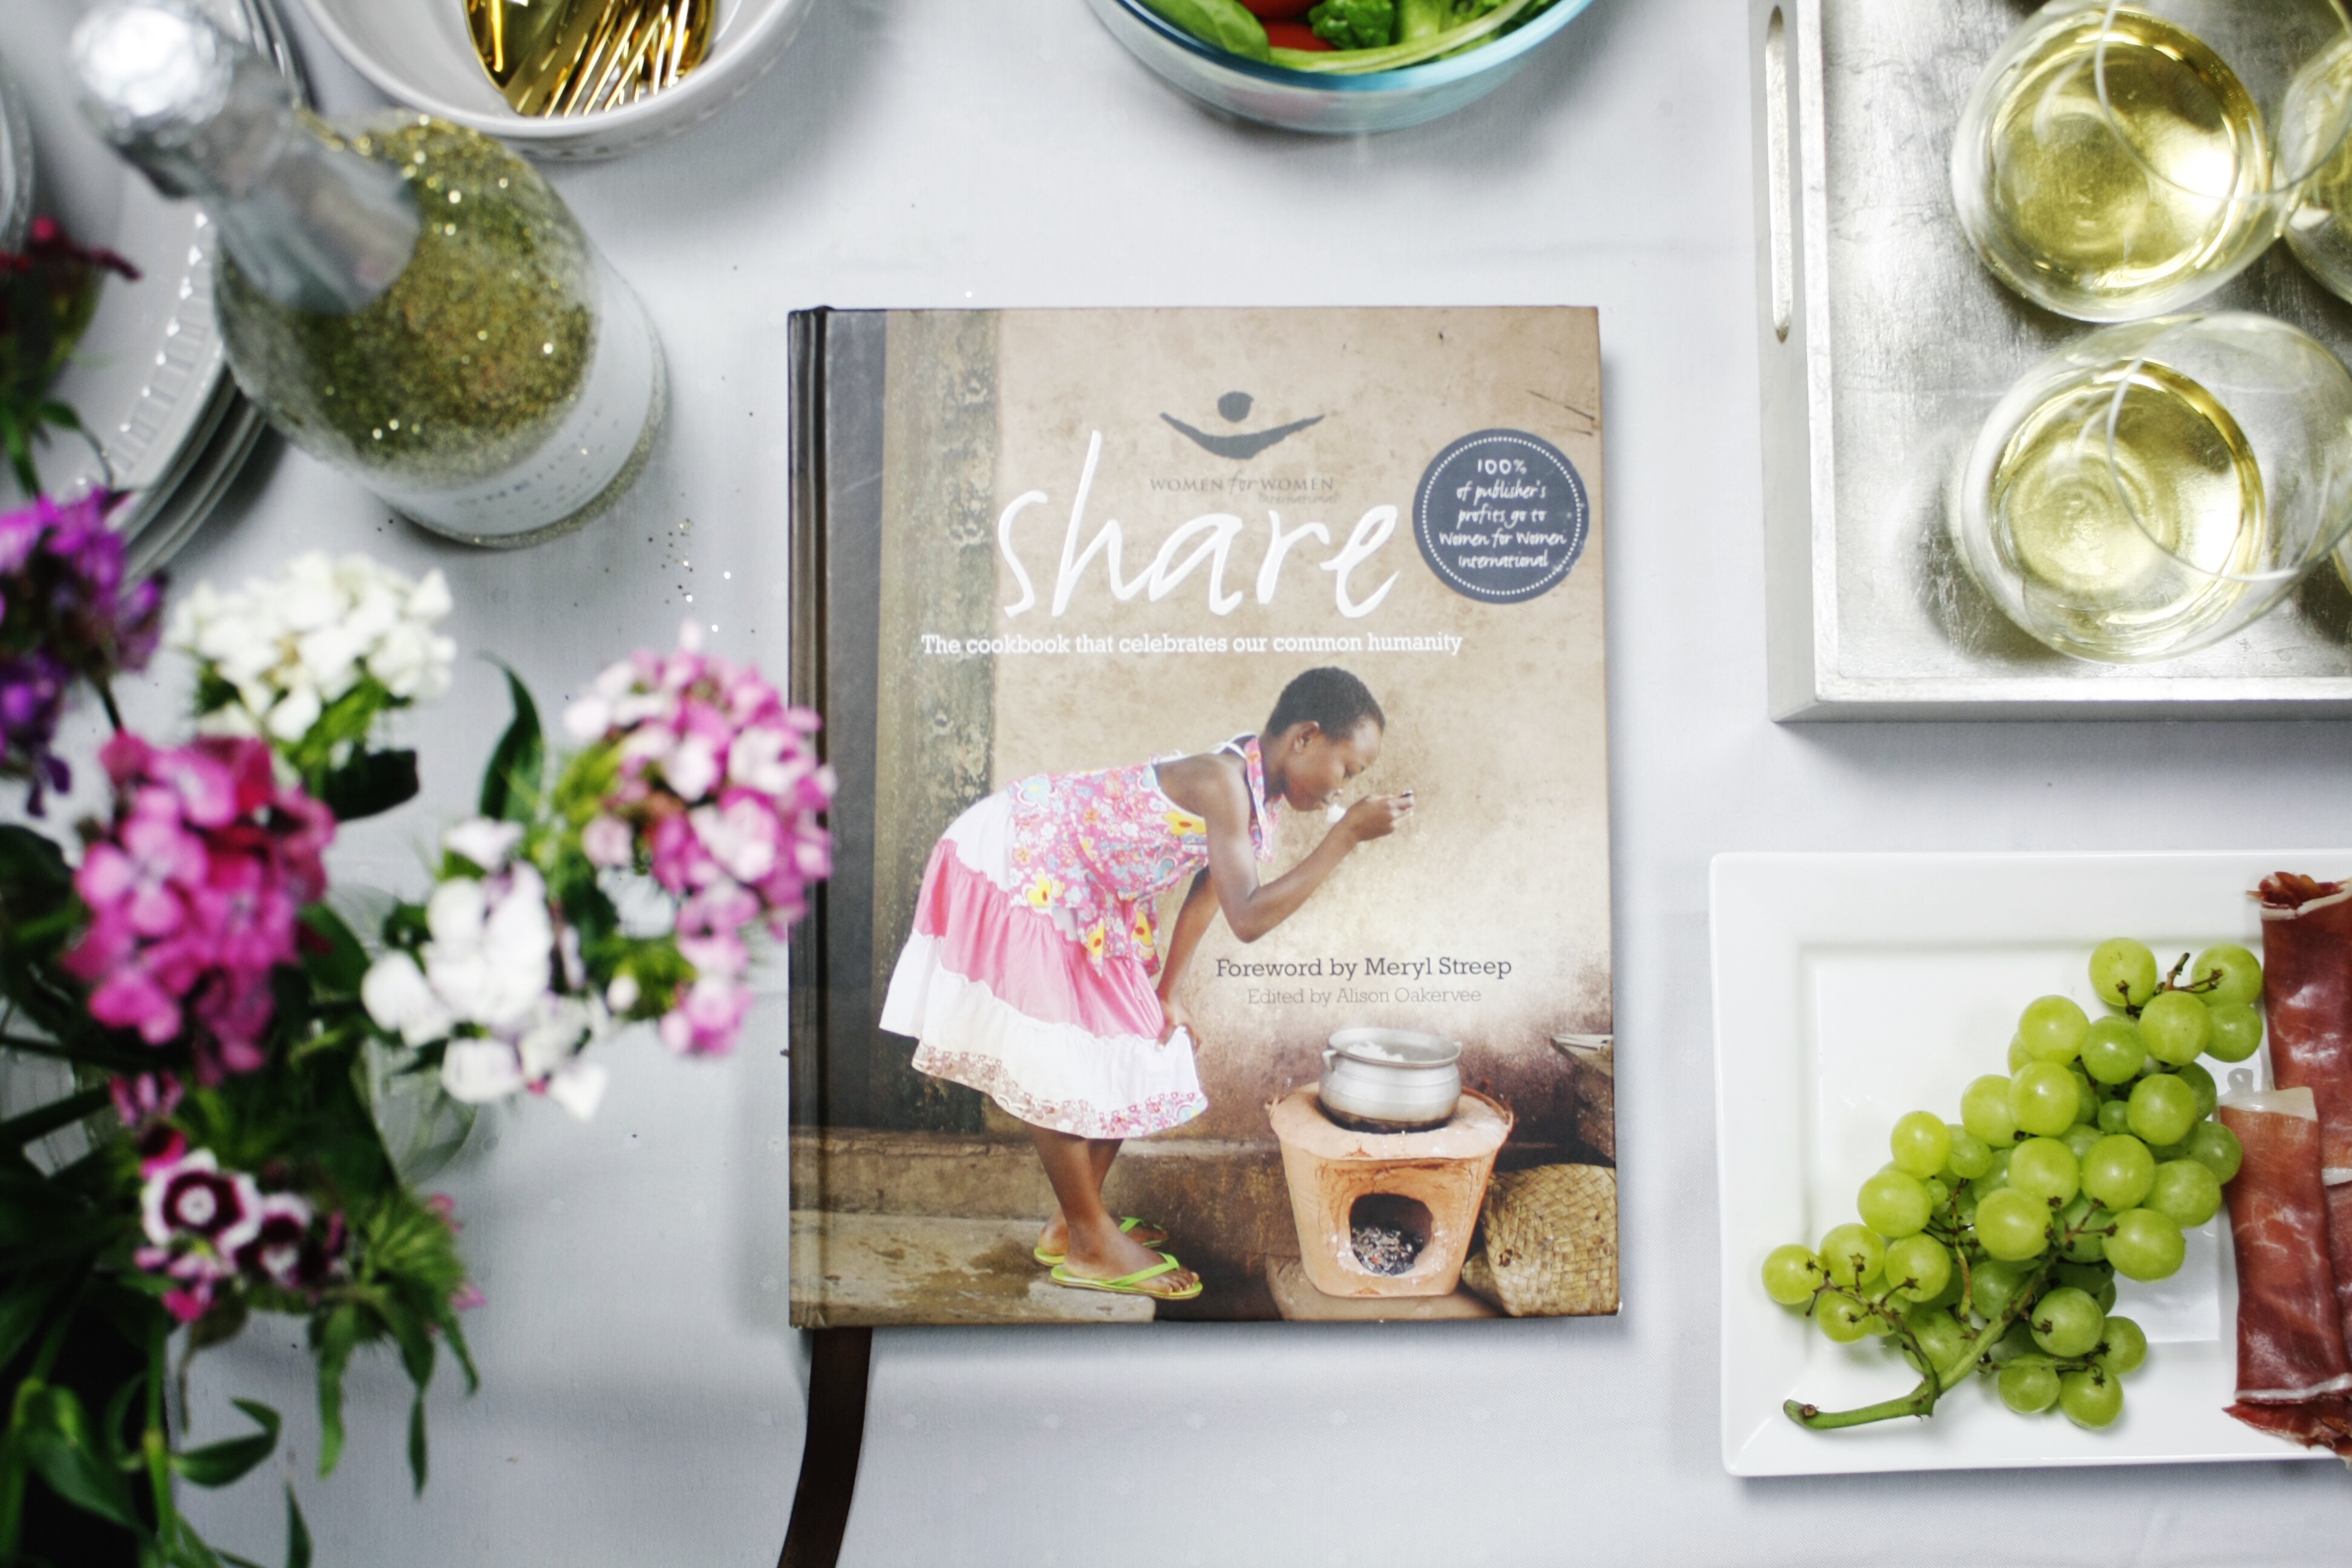 Lourdes Martin featuring a cookbook that gives back.